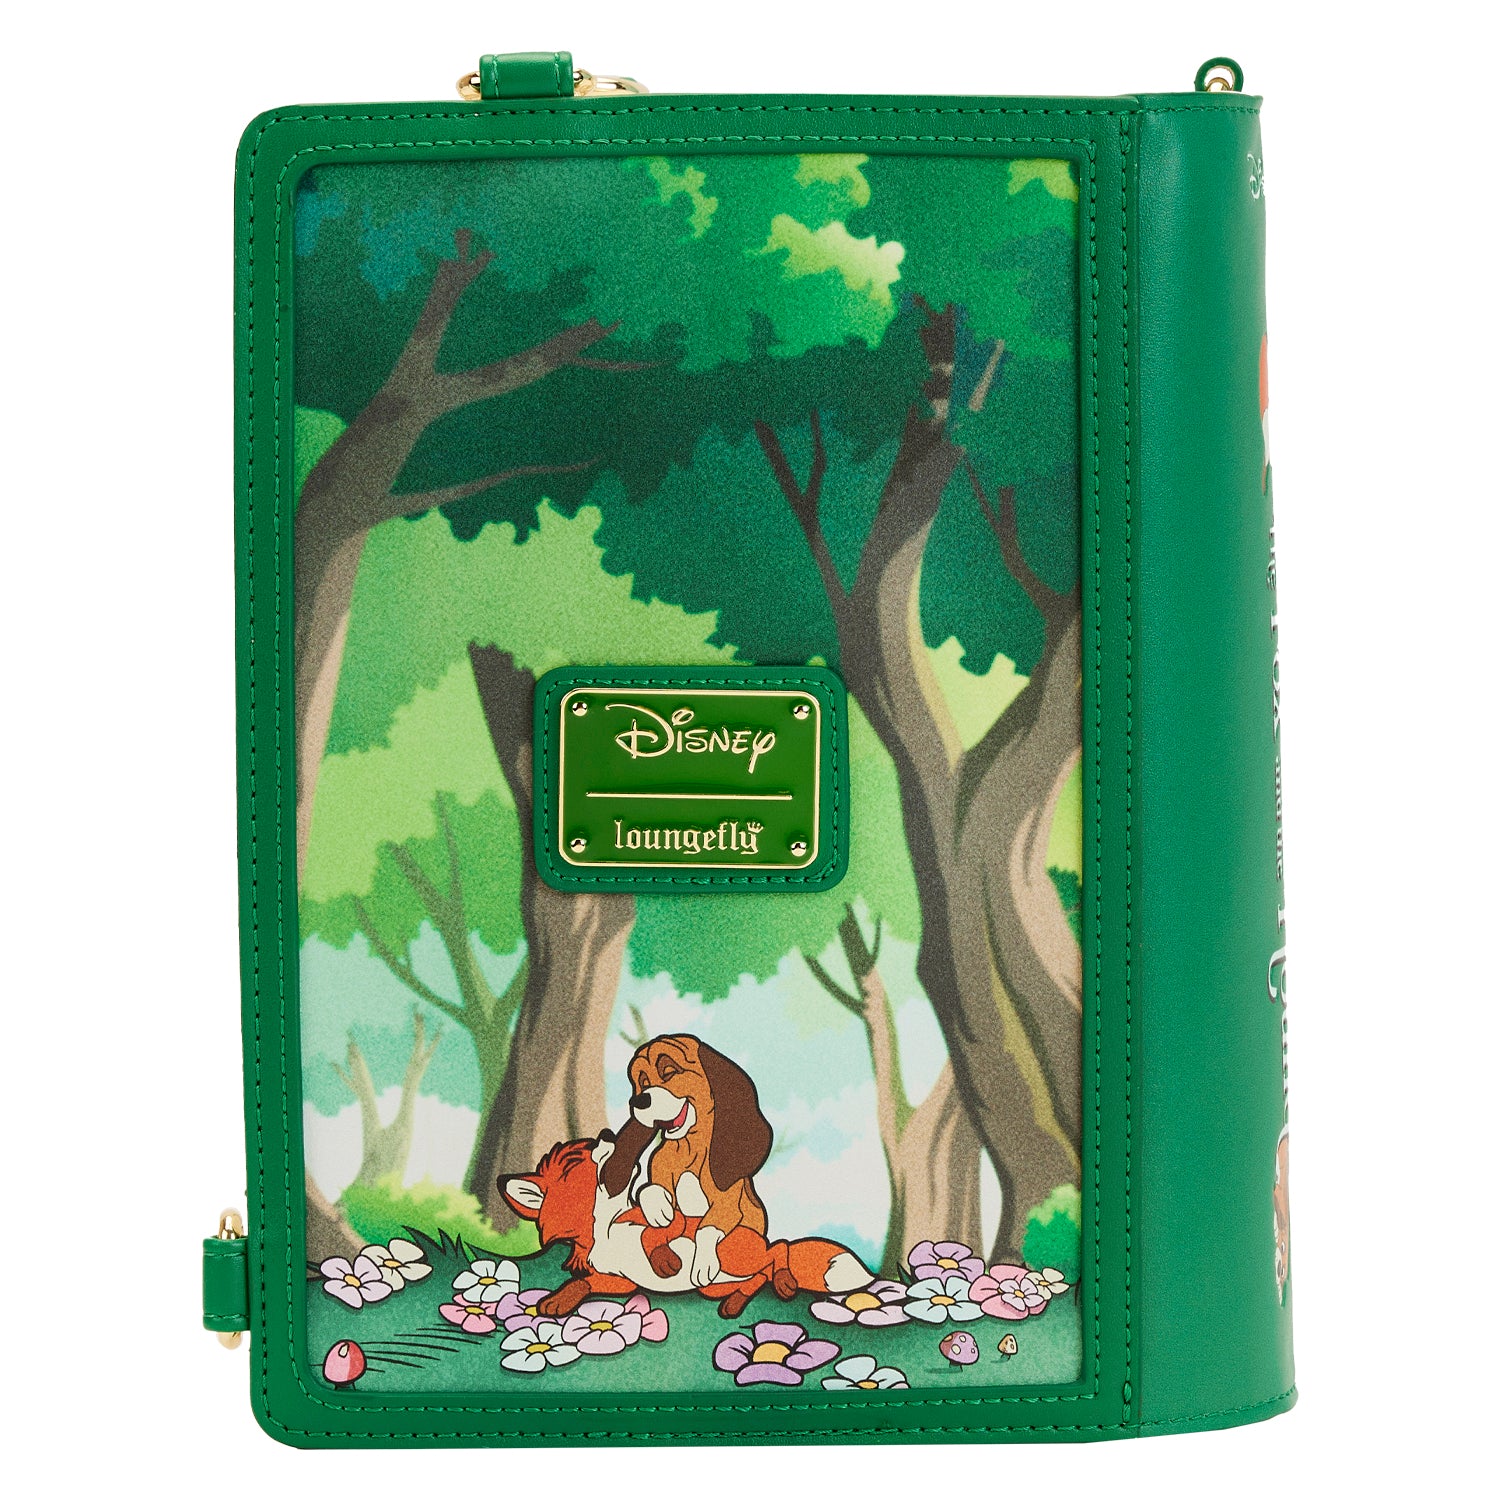 Loungefly Disney Classic Books Fox and the Hound Convertible Crossbody Bag